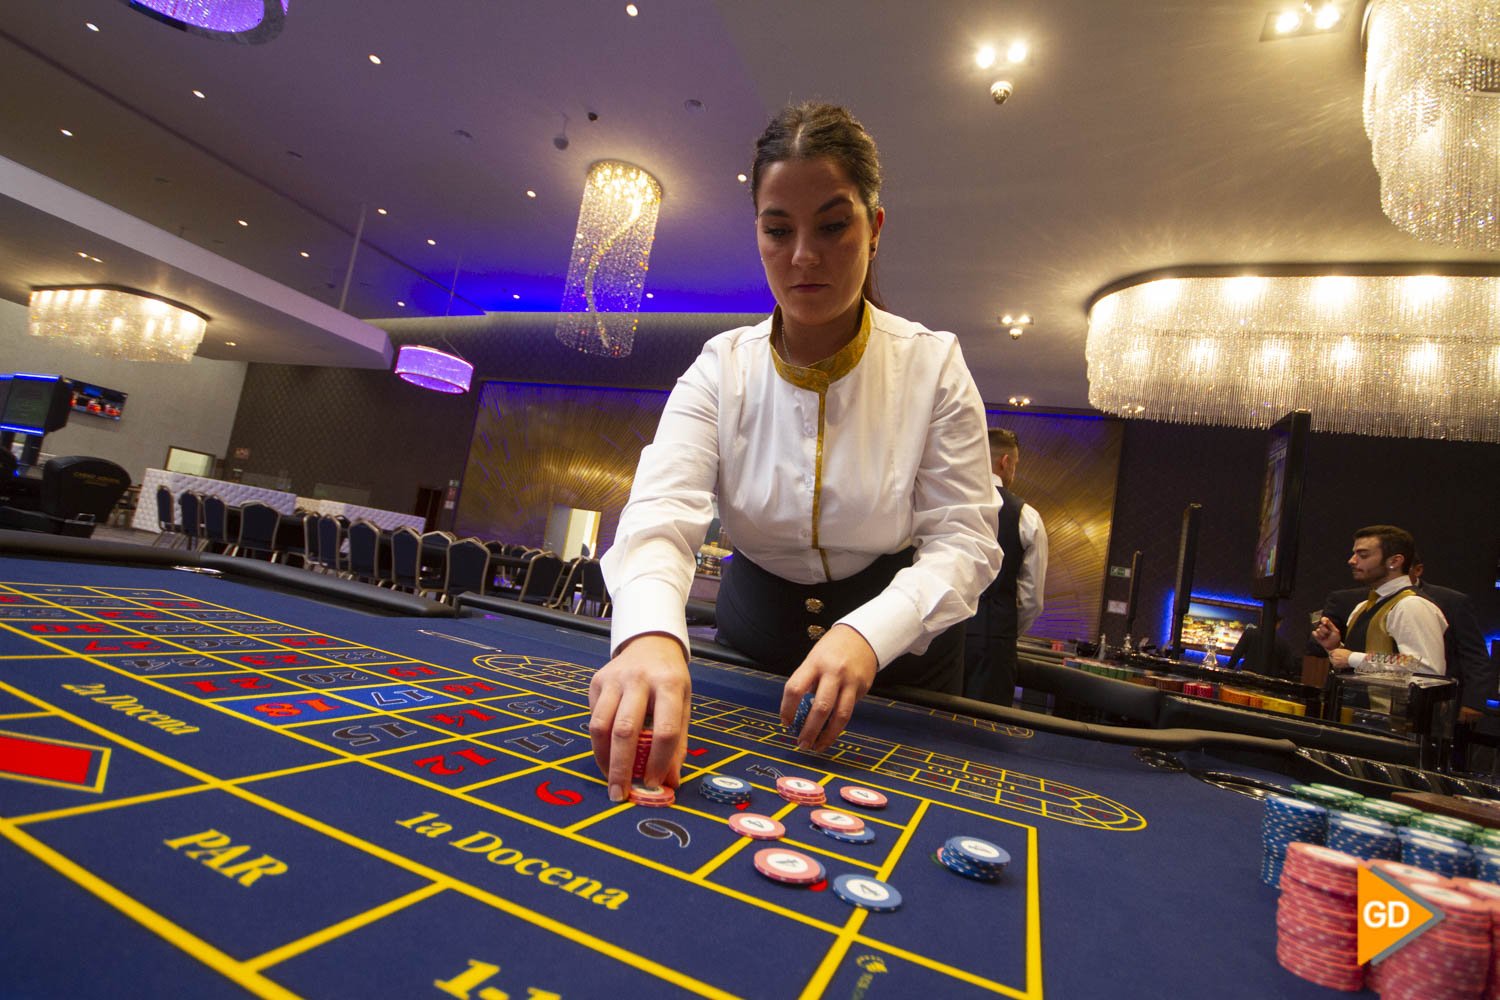 casino And The Art Of Time Management